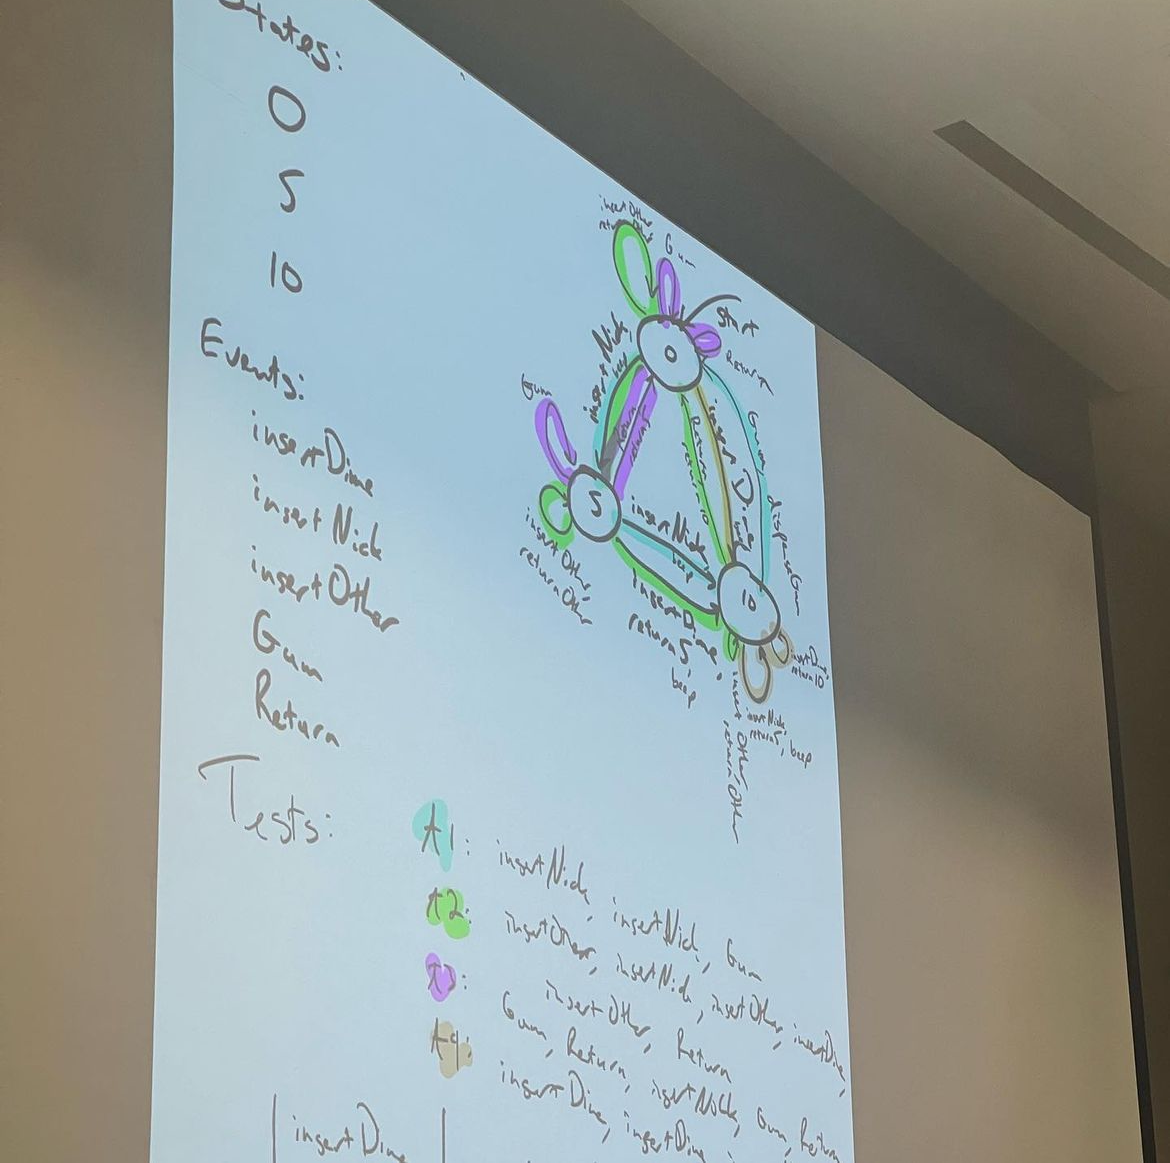 An image of a Finite State Machine from a Software Testing lecture.